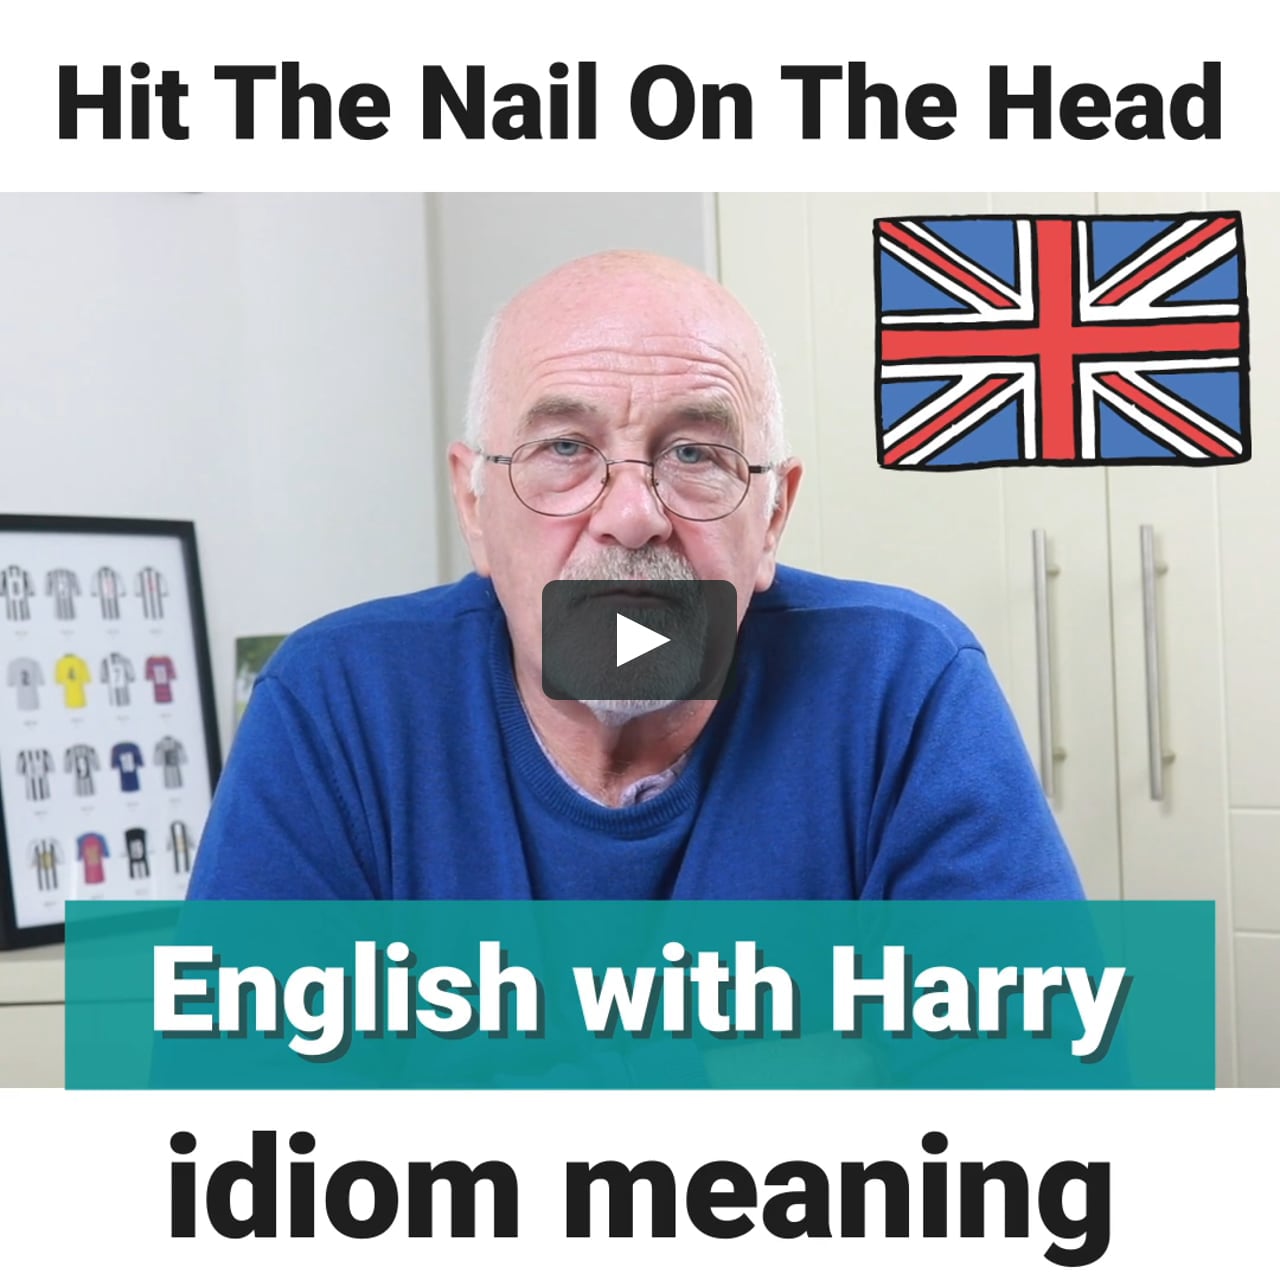 Hit the nail on the head | Idiom meaning on Vimeo